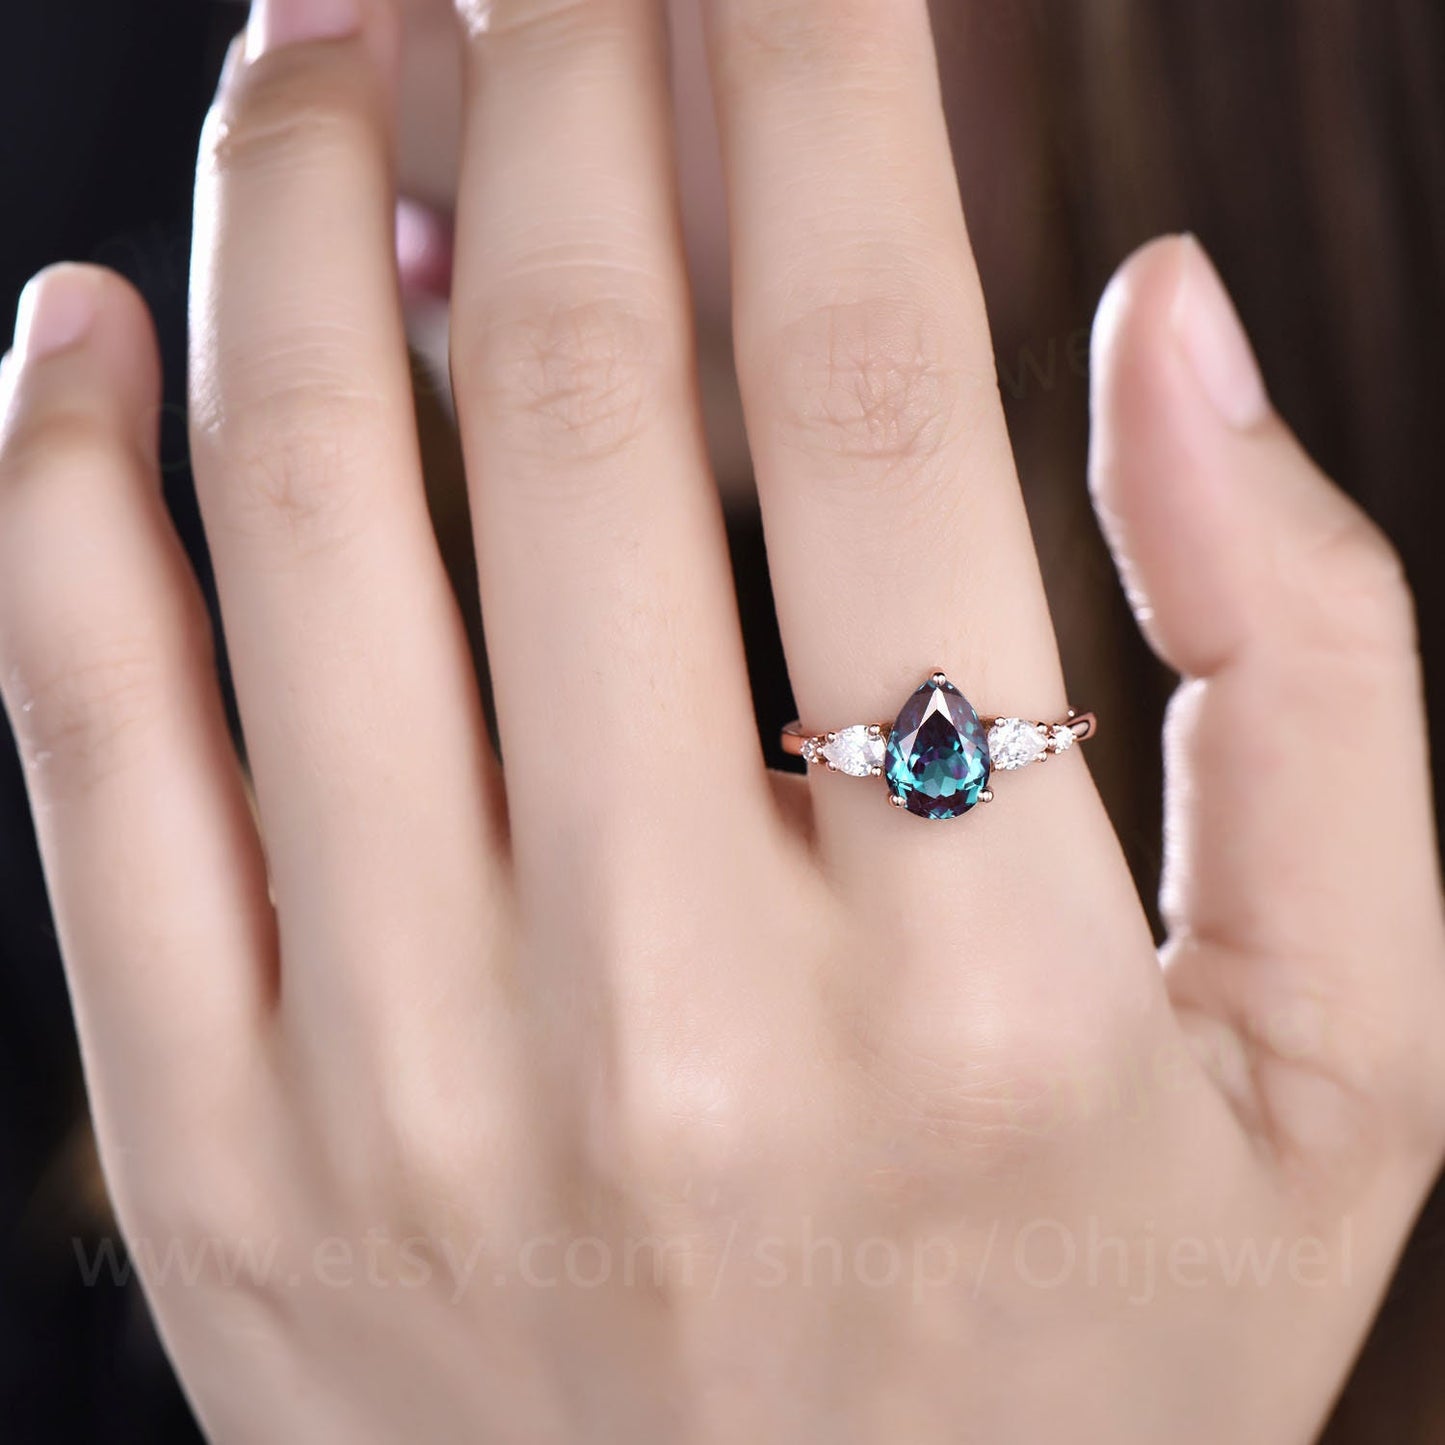 Vintage Alexandrite ring minimalist for women unique pear shaped Alexandrite engagement ring five stone moissanite ring rose gold silver